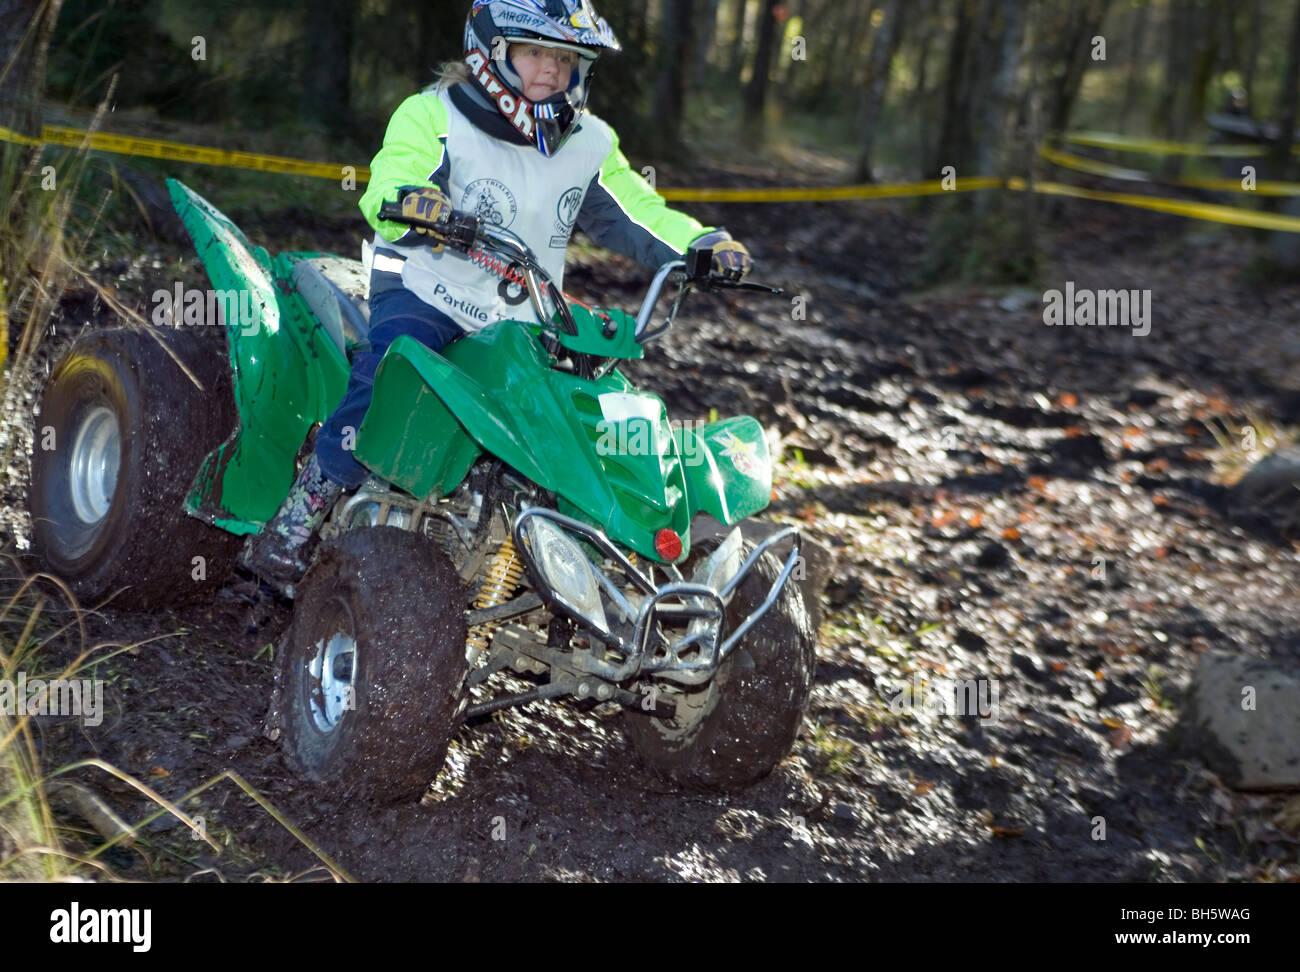 4 wheel trial competition. A young girl in protective wear rides all terrain vehicle off road Stock Photo